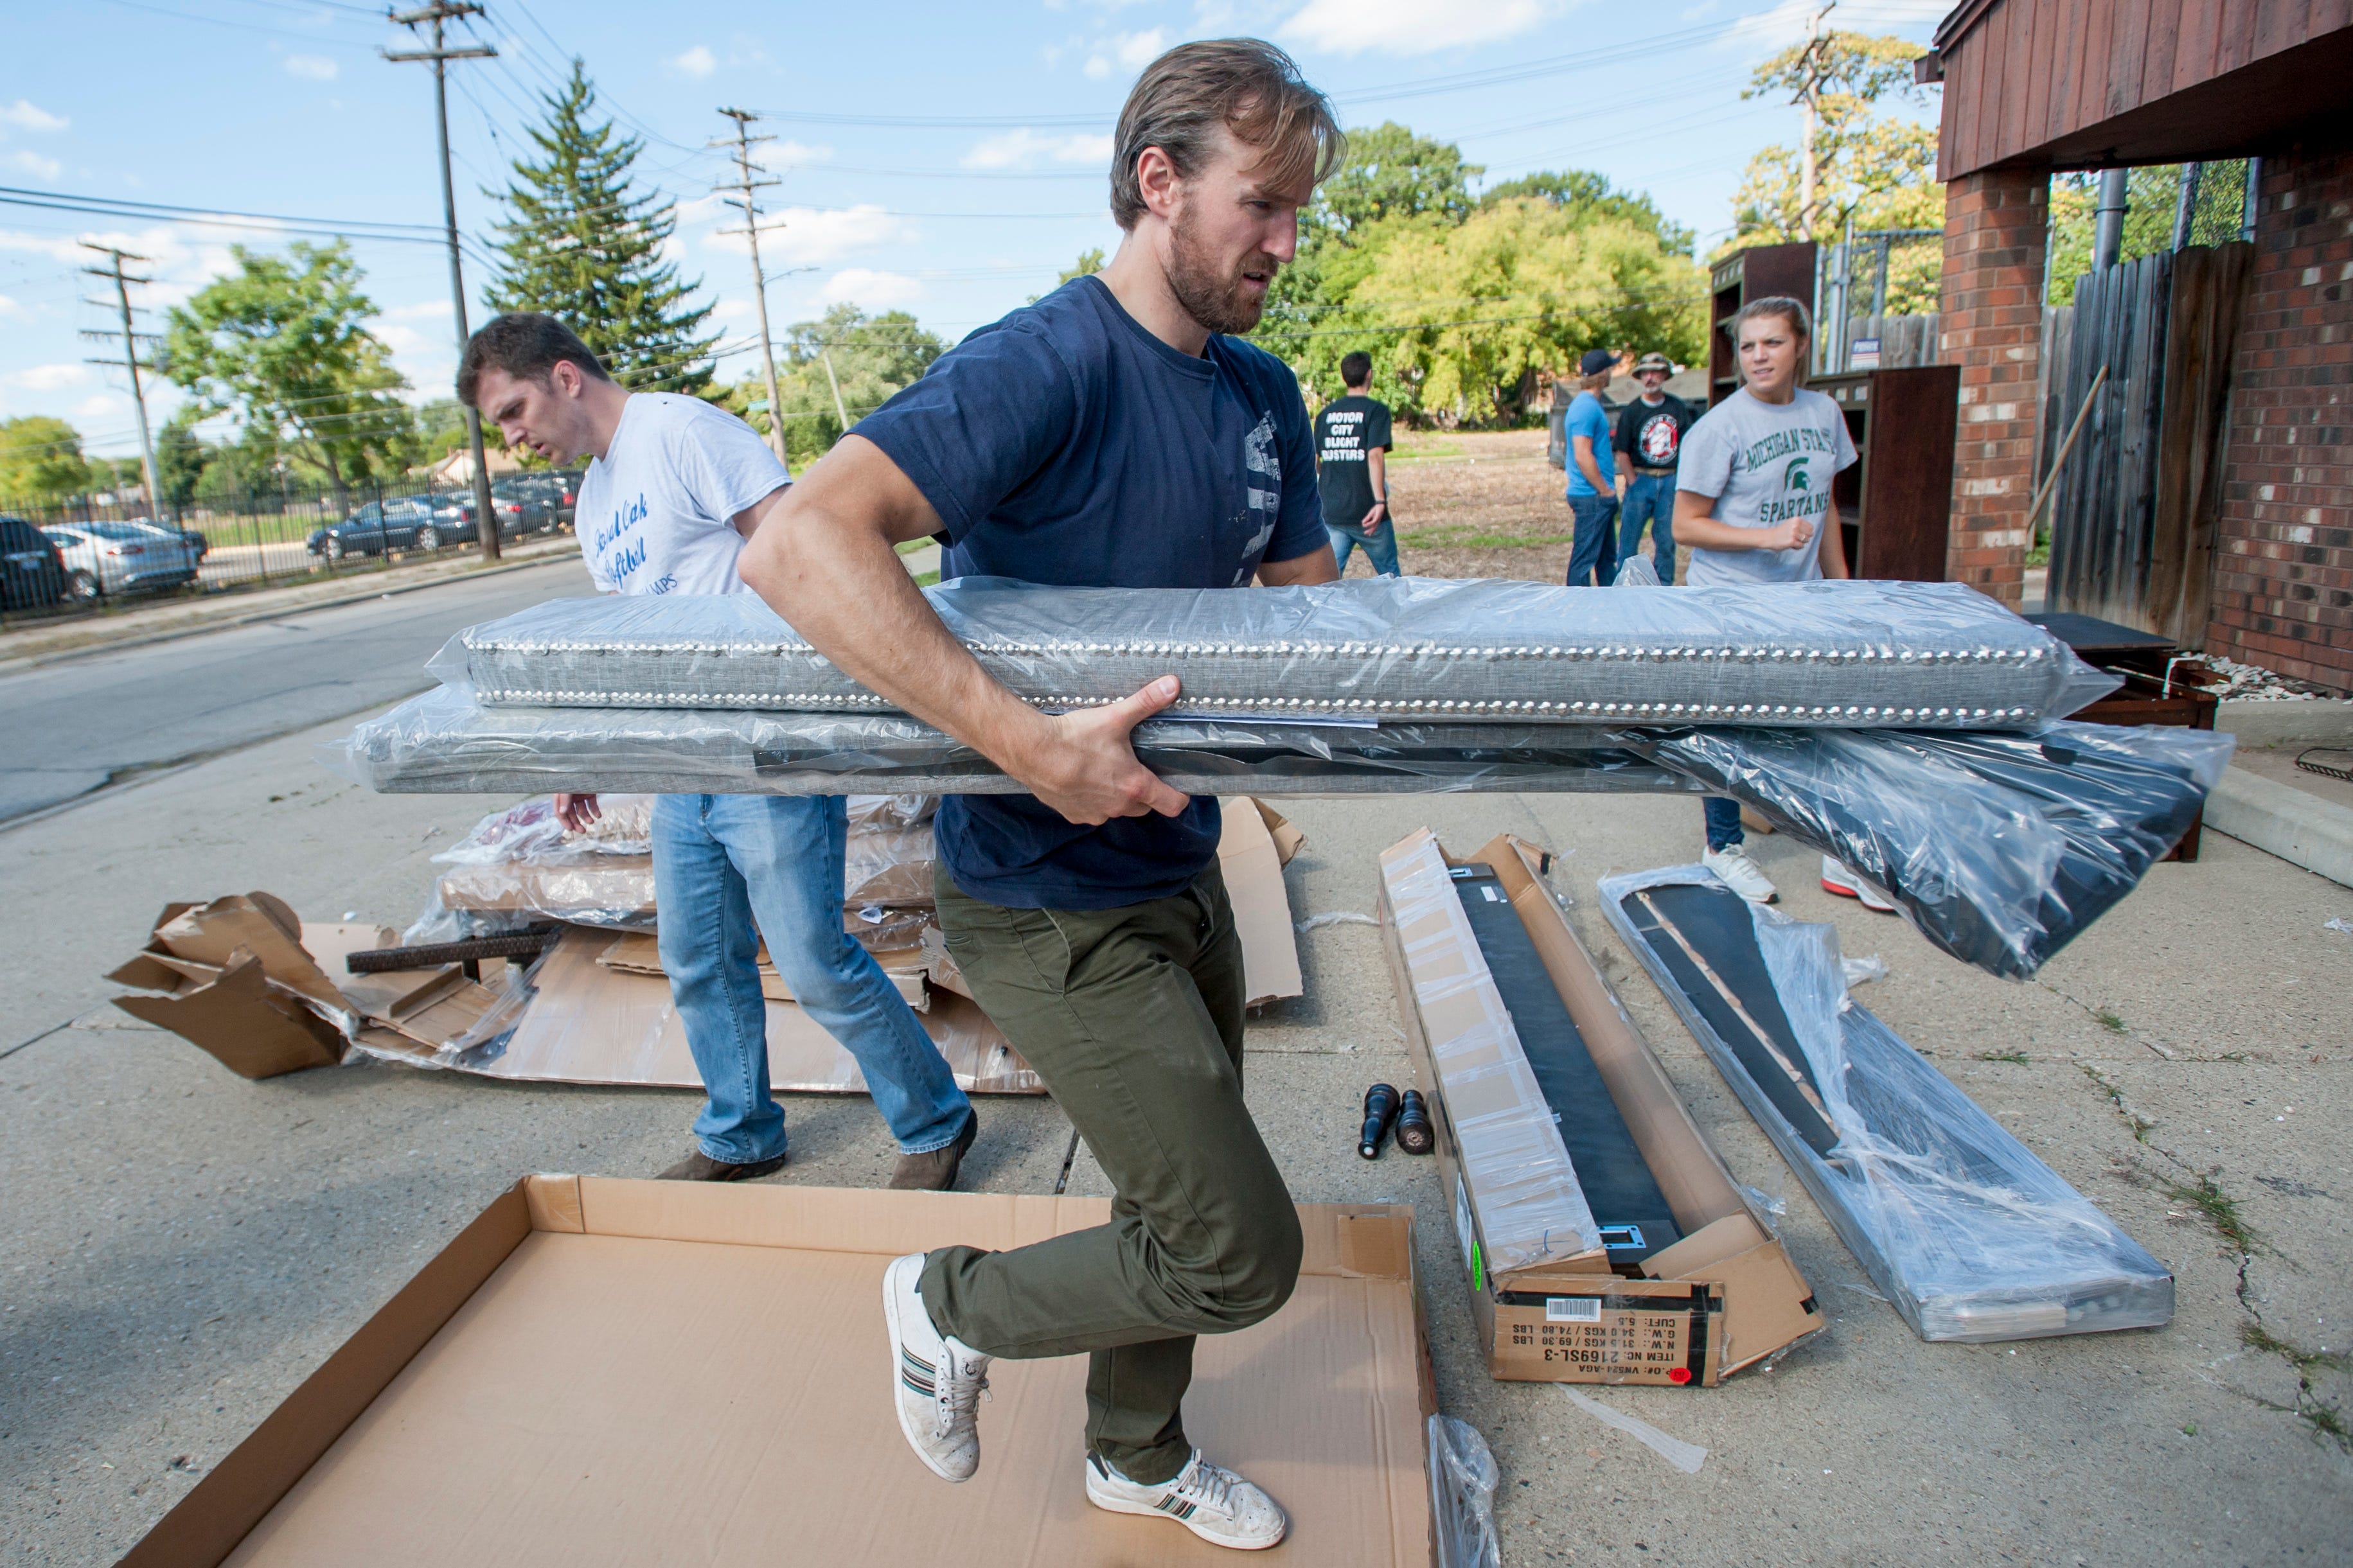 Red Wings defenseman Niklas Kronwall helps move furniture while volunteering with the Motor City Blight Busters in Detroit on Sept. 16, 2014.